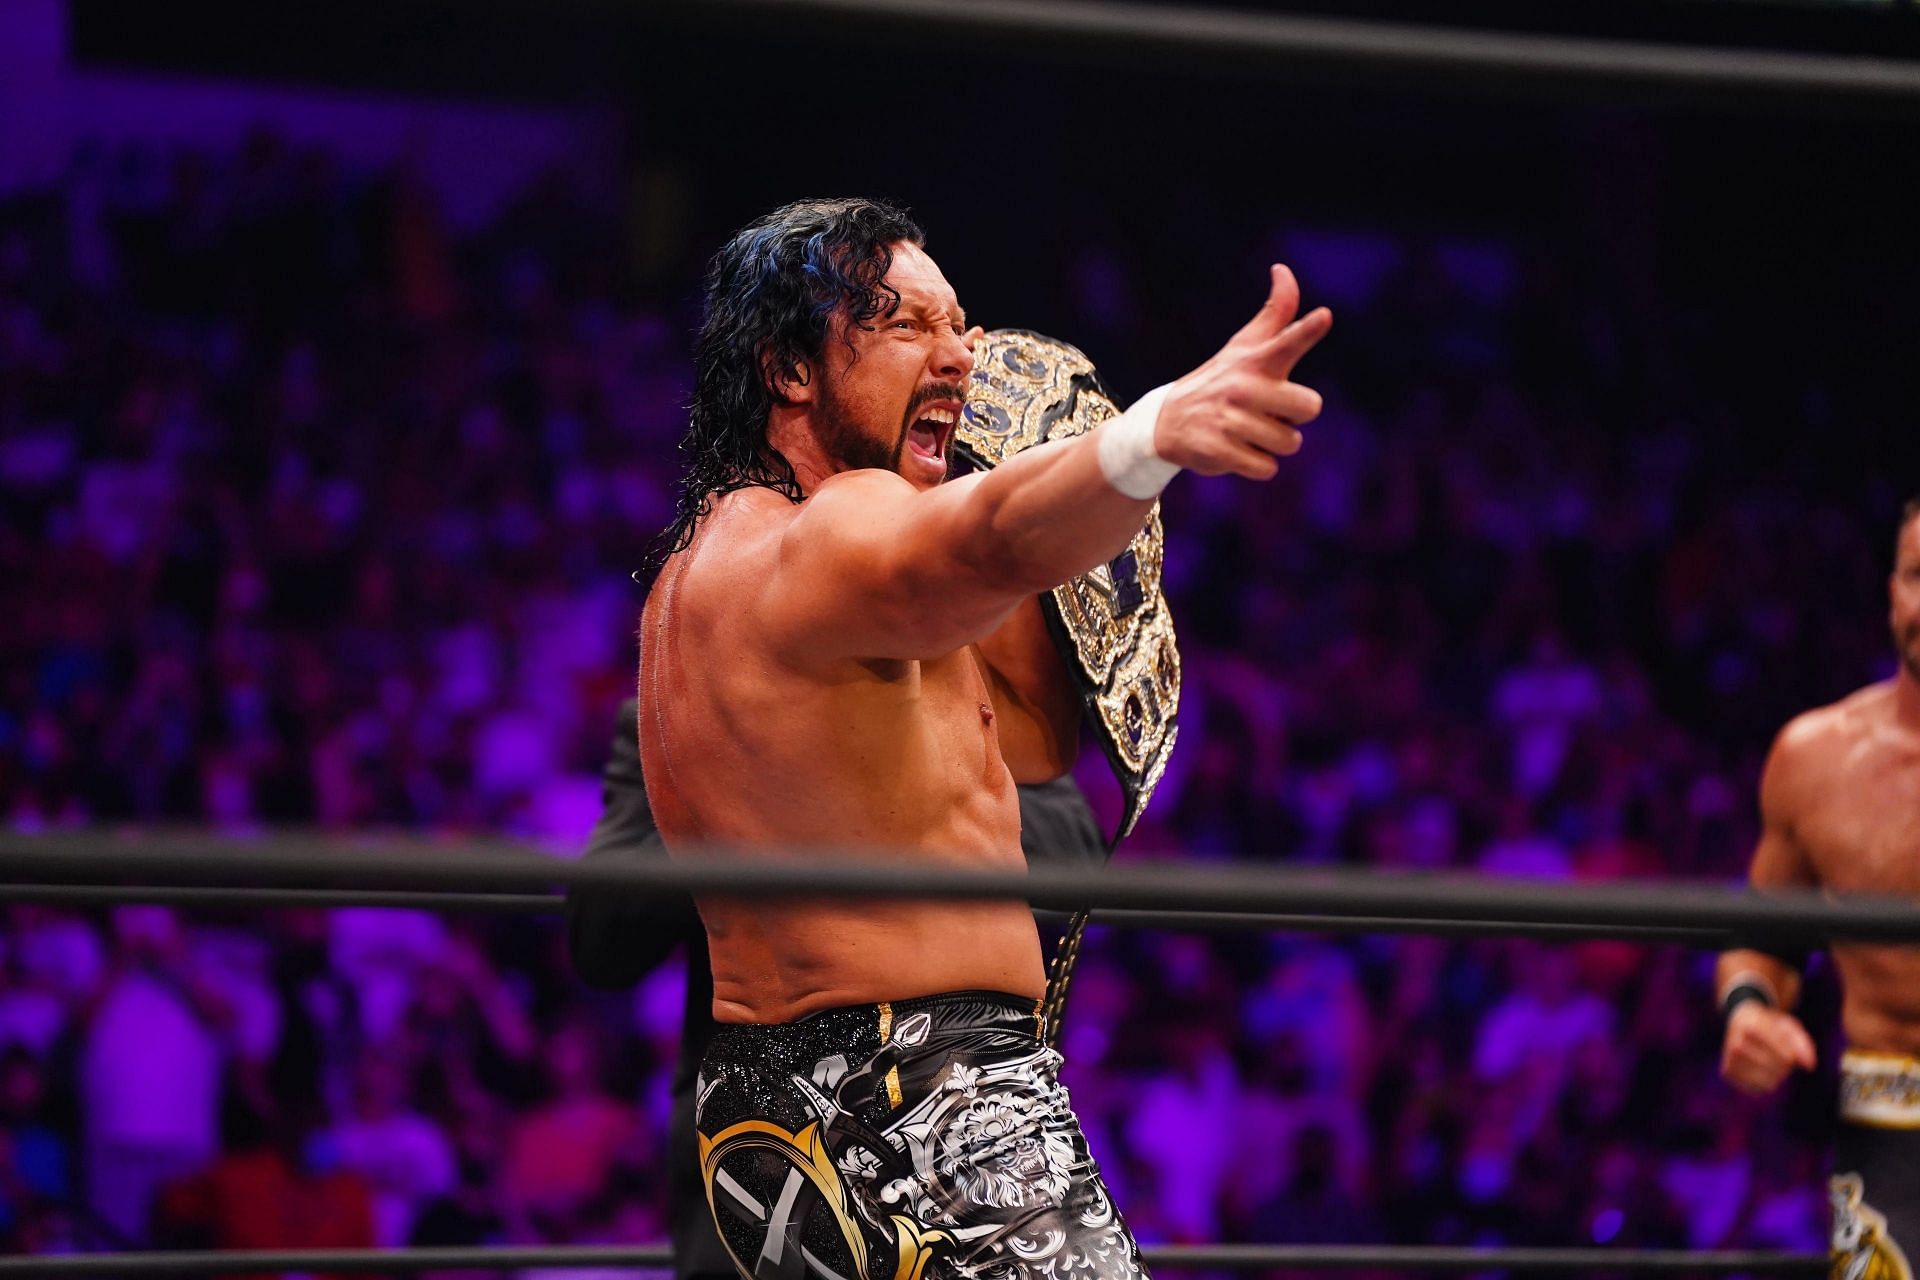 Kenny Omega during his reign as AEW World Champion!